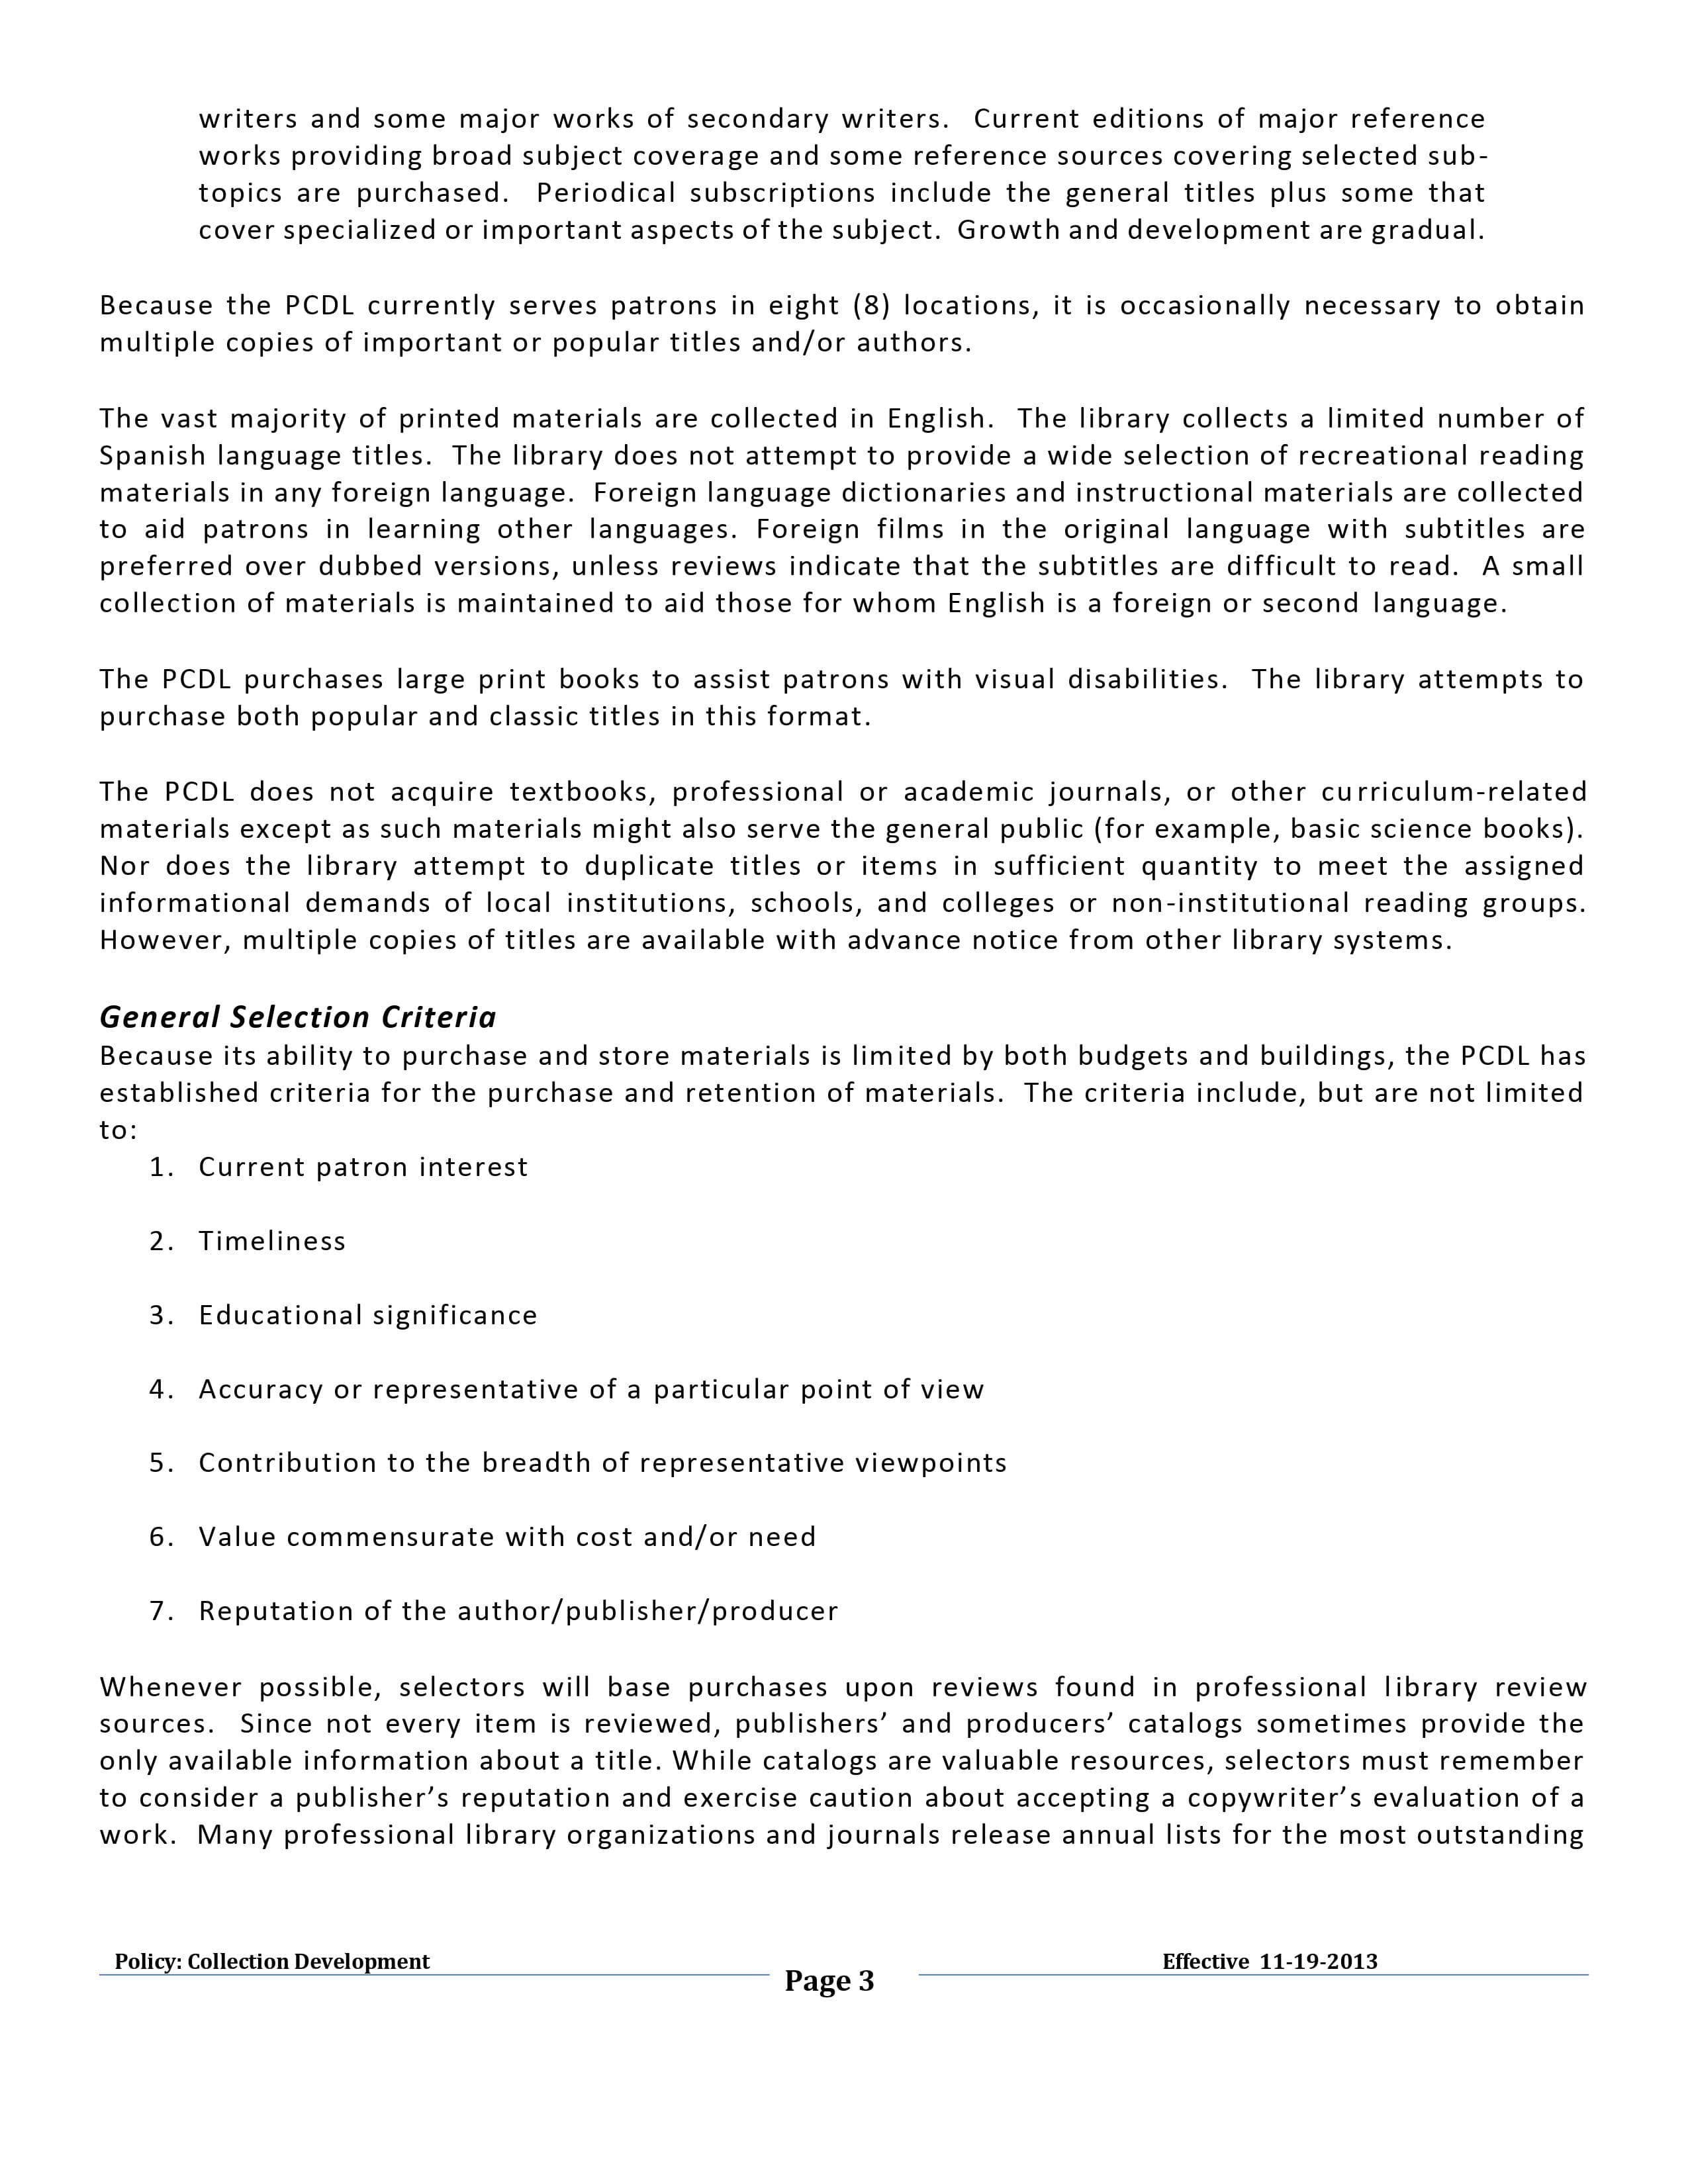 PCDL Collection Development Policy Page 3